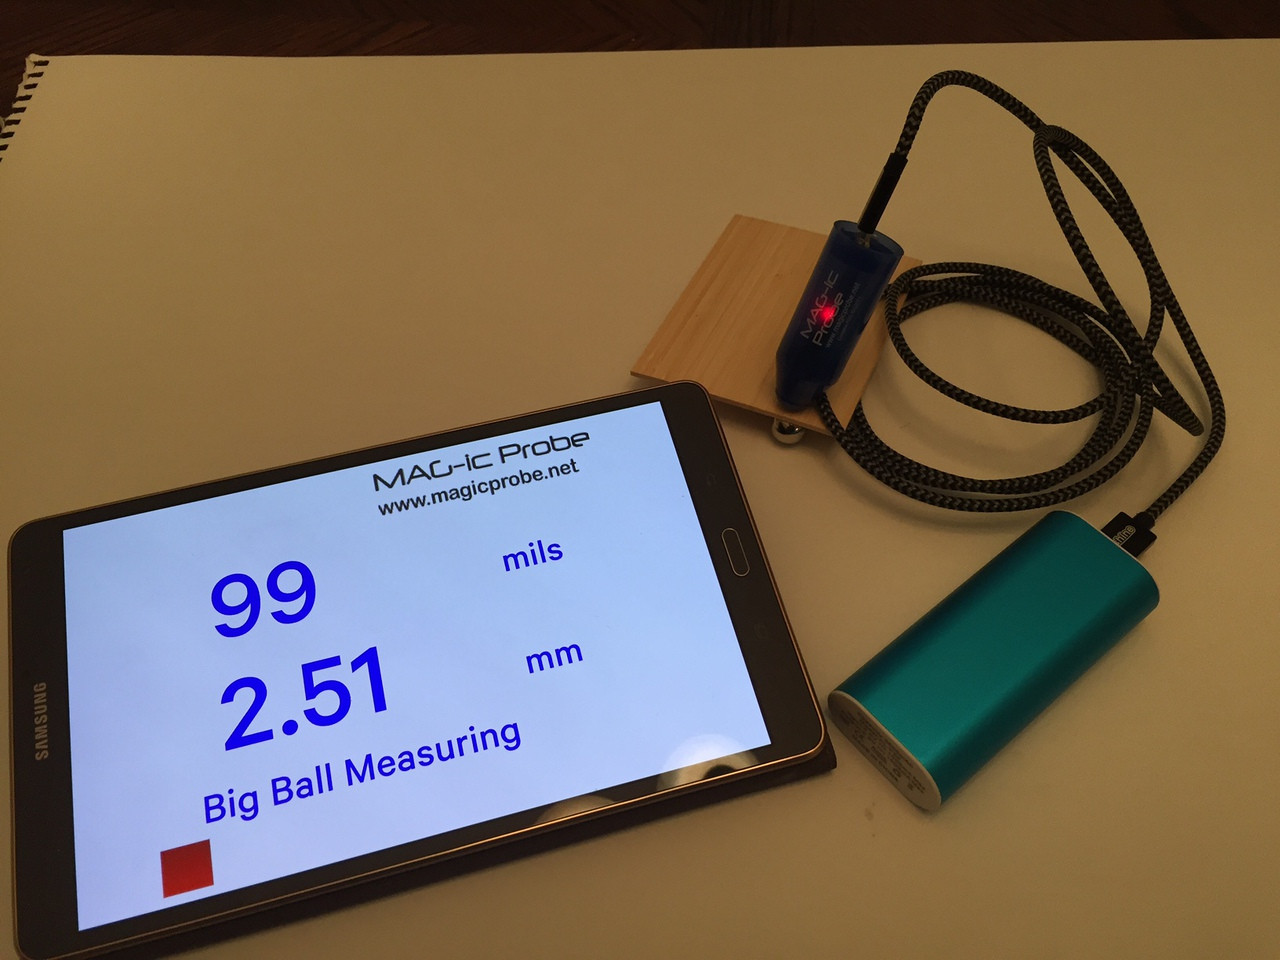 MAG-ic Probe WiFi Thickness Gauge